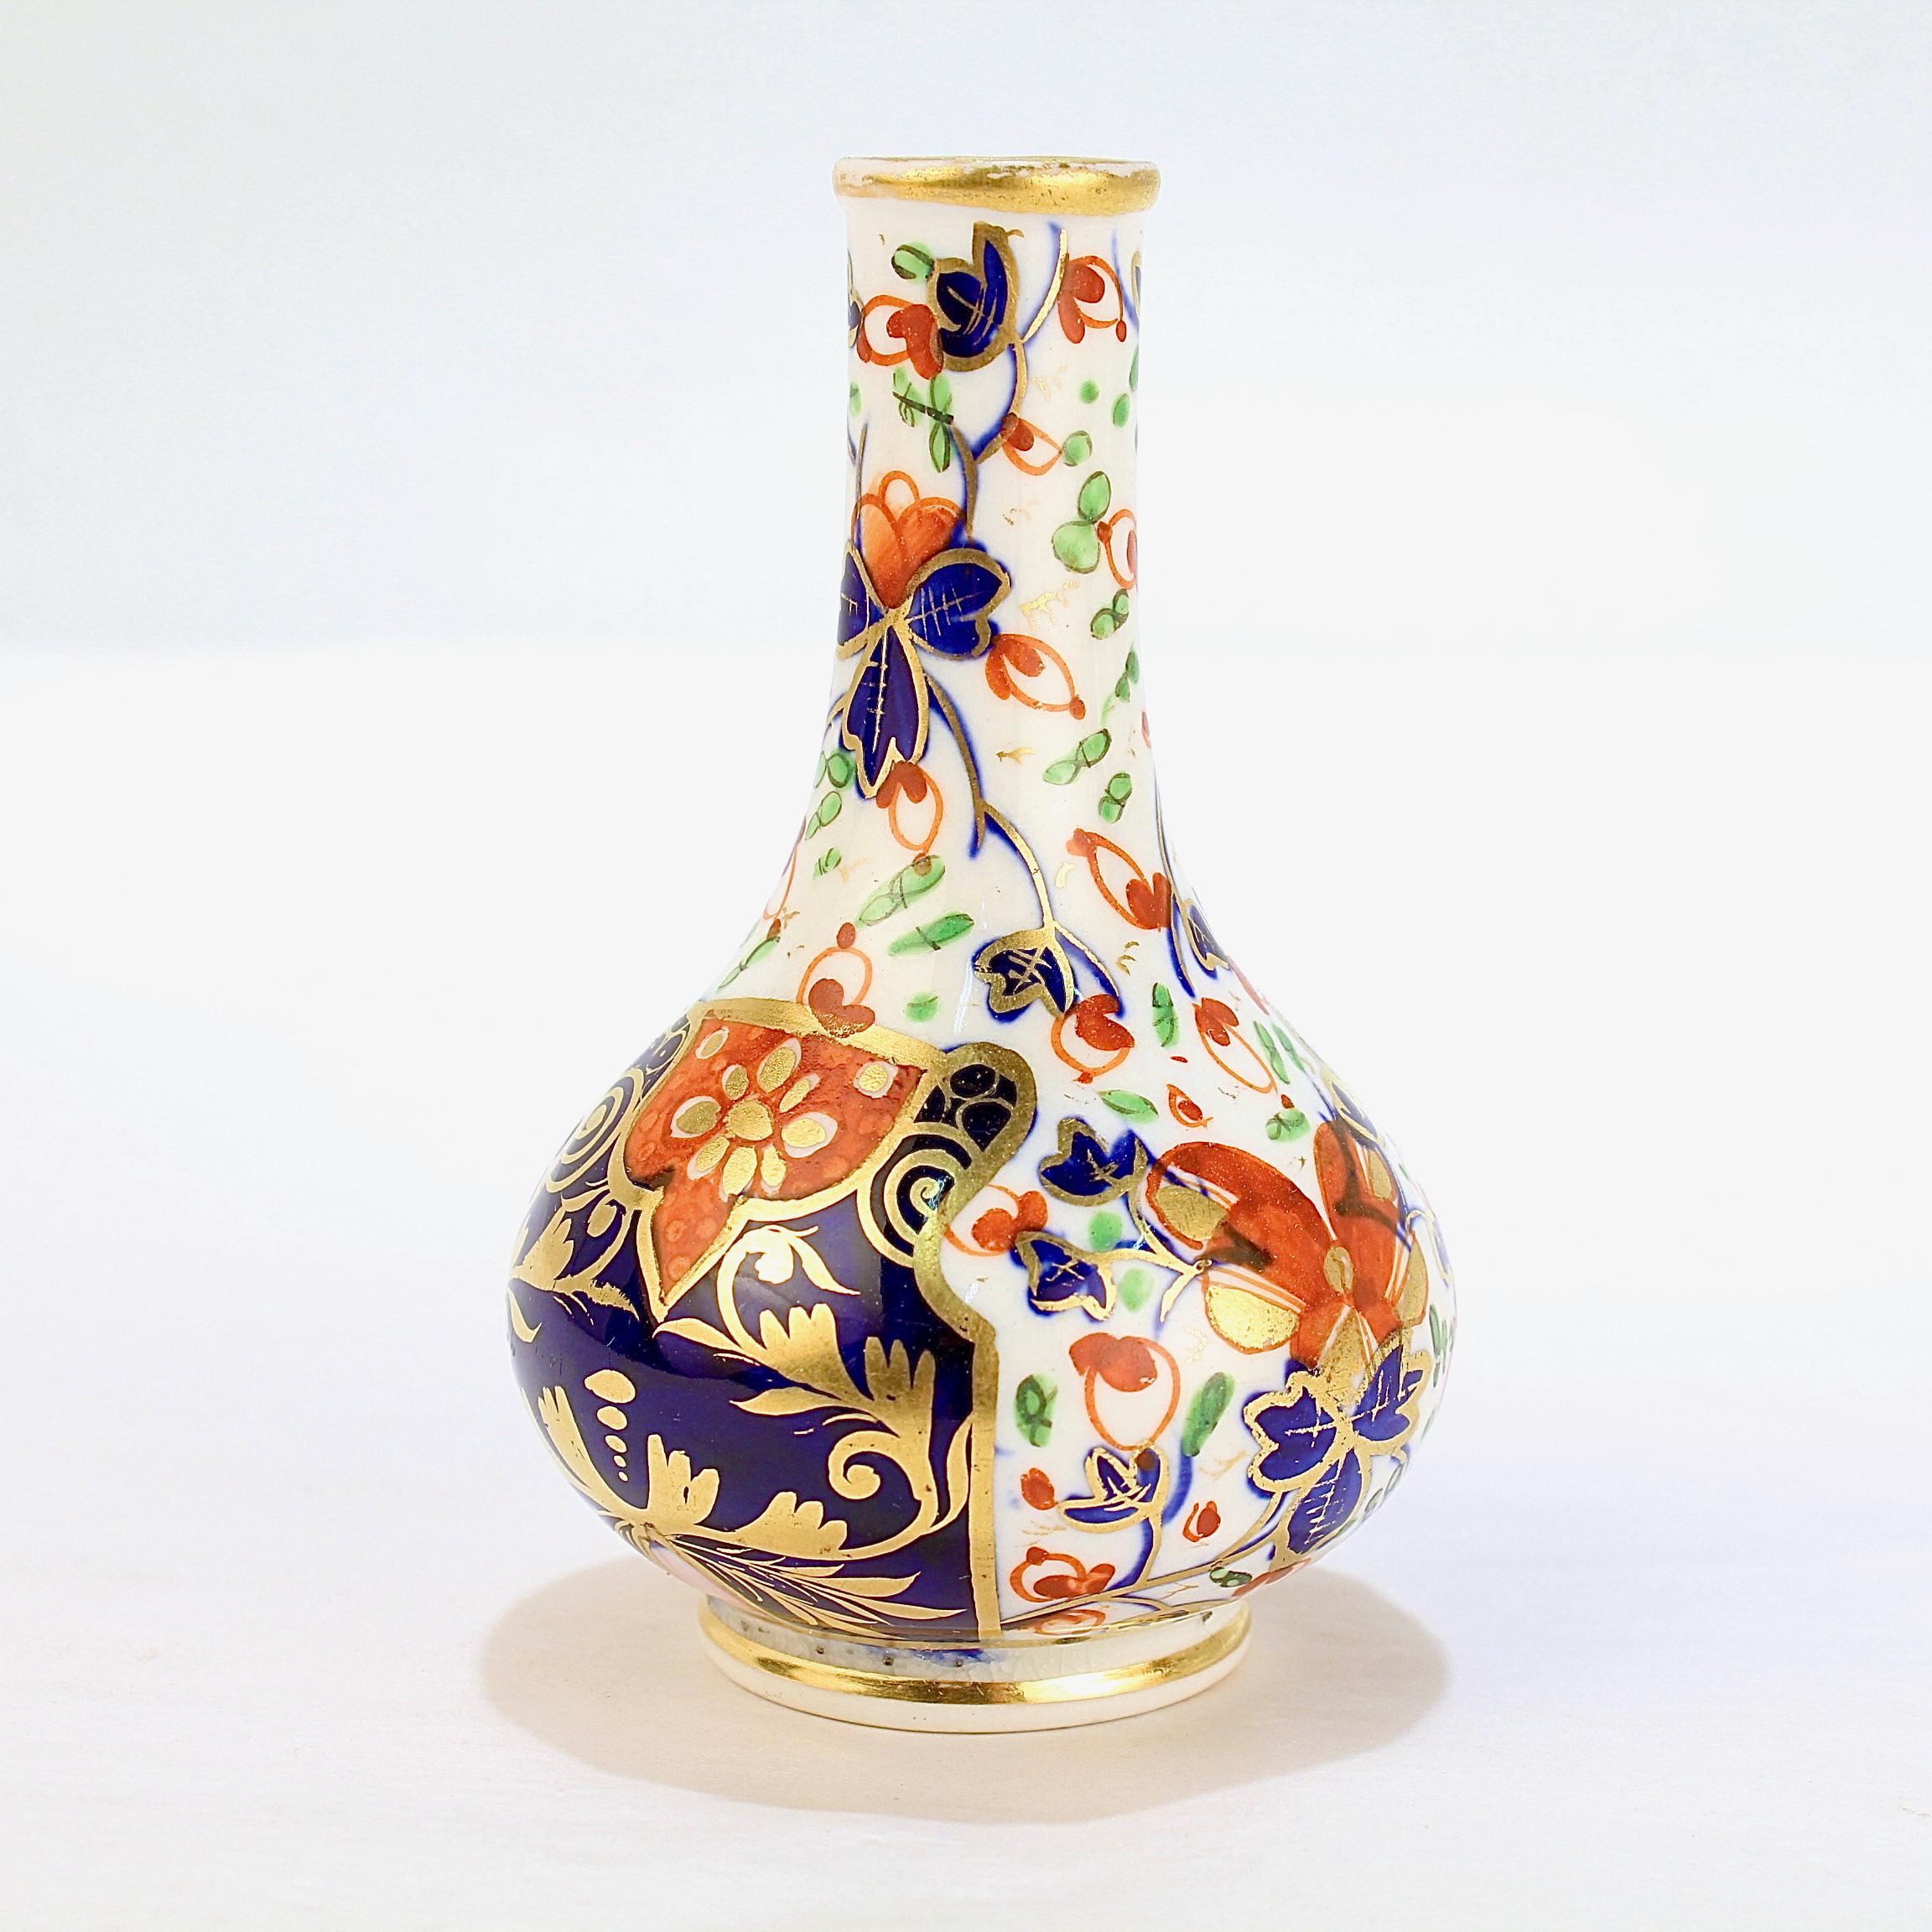 A fine antique English porcelain bud vase

By the Derby Porcelain Manufactory (later known as Royal Crown Derby).

Decorated in an Imari pattern with cobalt blue, reds, green, and richly gilded. 

Simply a wonderful example of Derby